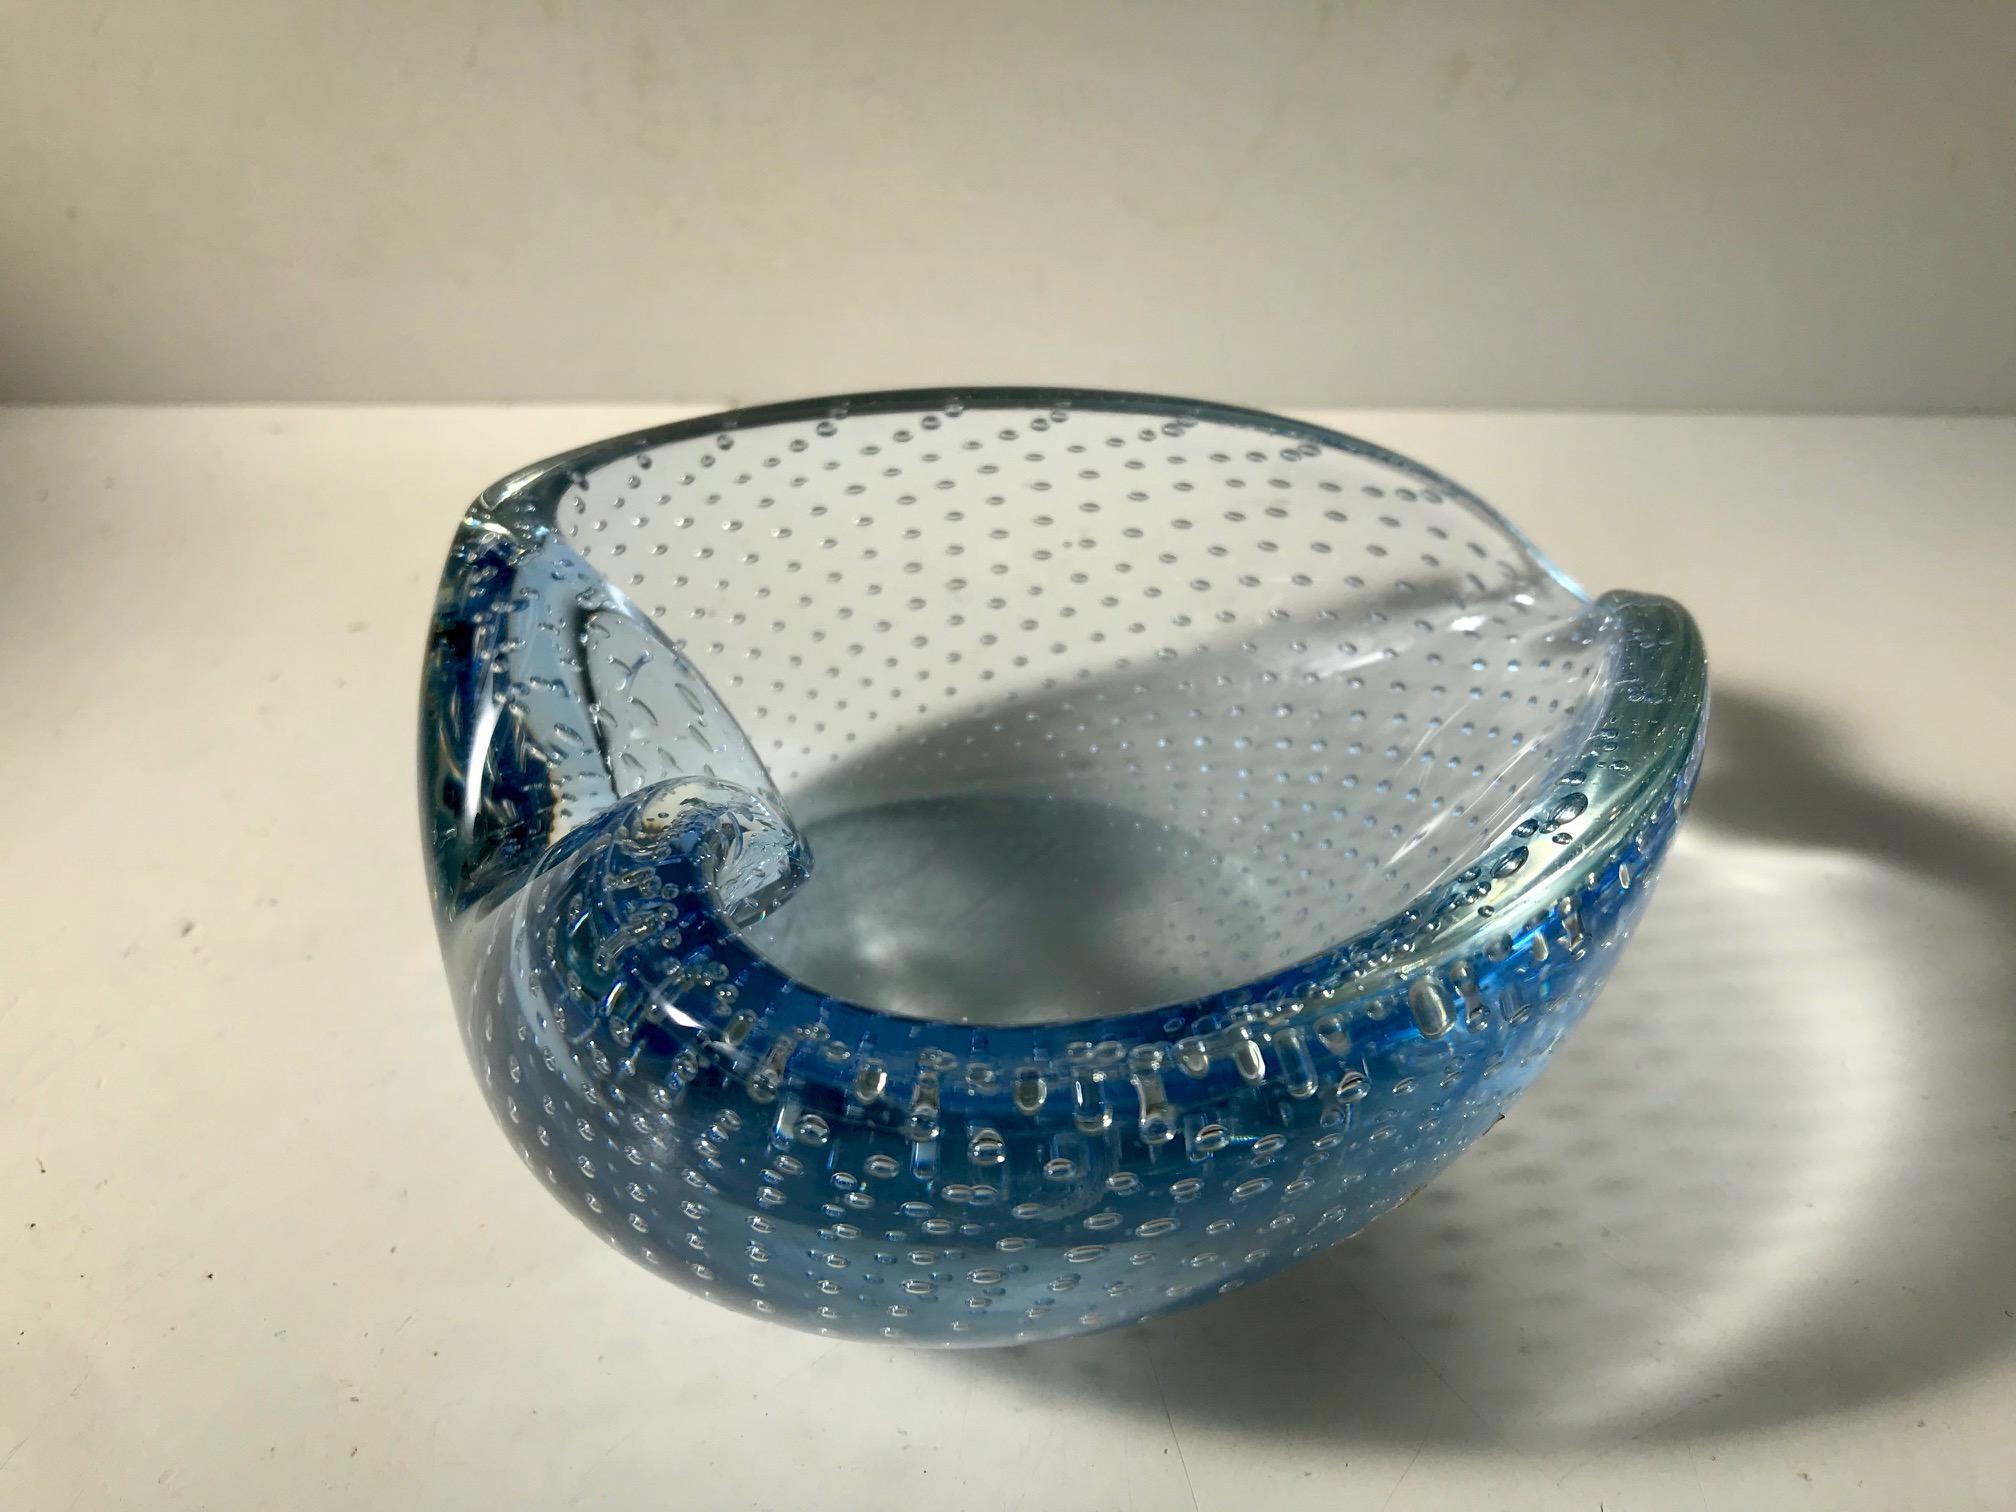 Hand blown aqua blue collapsed Murano art glass bowl or ashtray. Executed with incapsulated and controlled air bubbles. It is attributed to Archimede Seguso, Italy, circa 1940s-1950s.